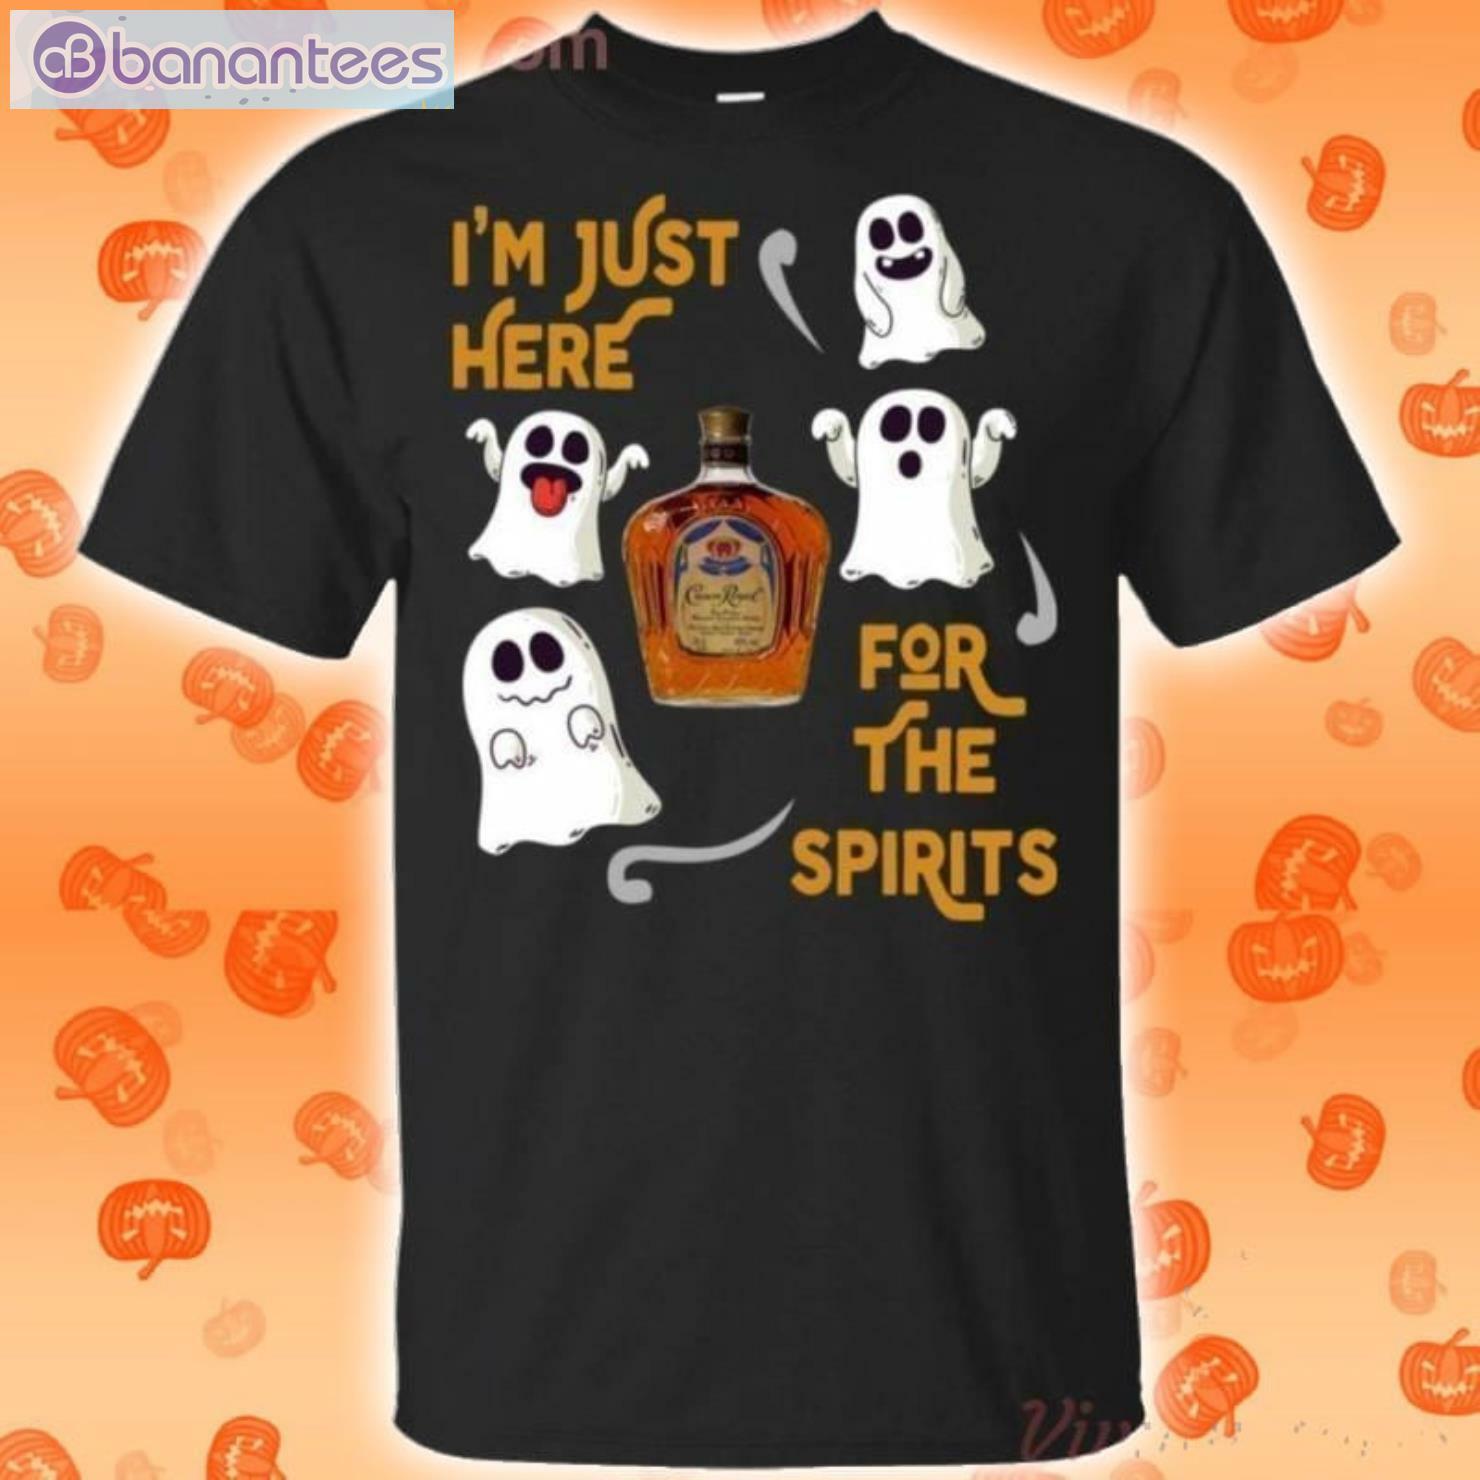 I'm Just Here For The Spirits Crown Royal Canadian Halloween T-Shirt Product Photo 1